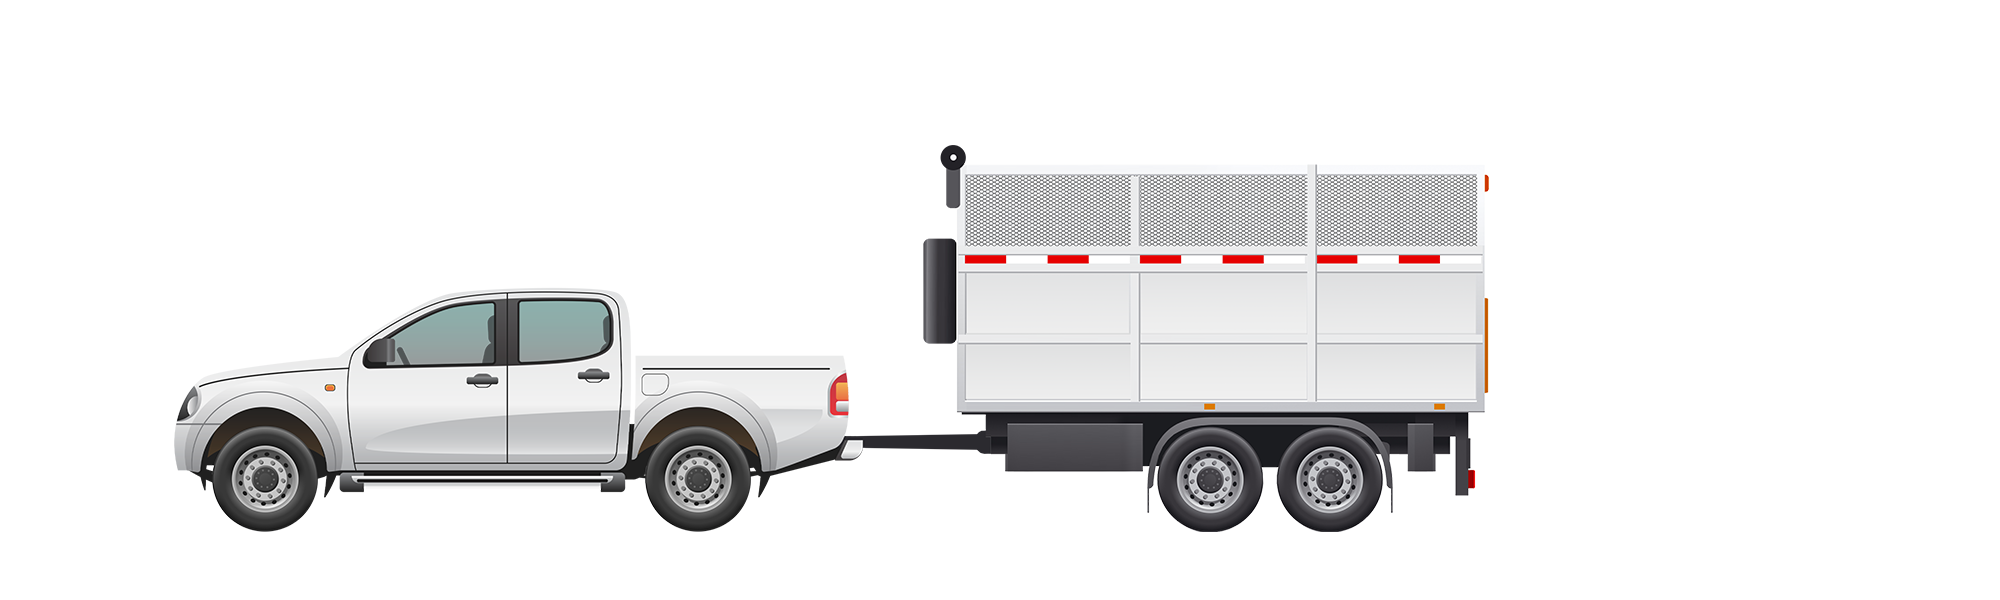 Artist Rendering of Pickup Trailer for Pricing Visual